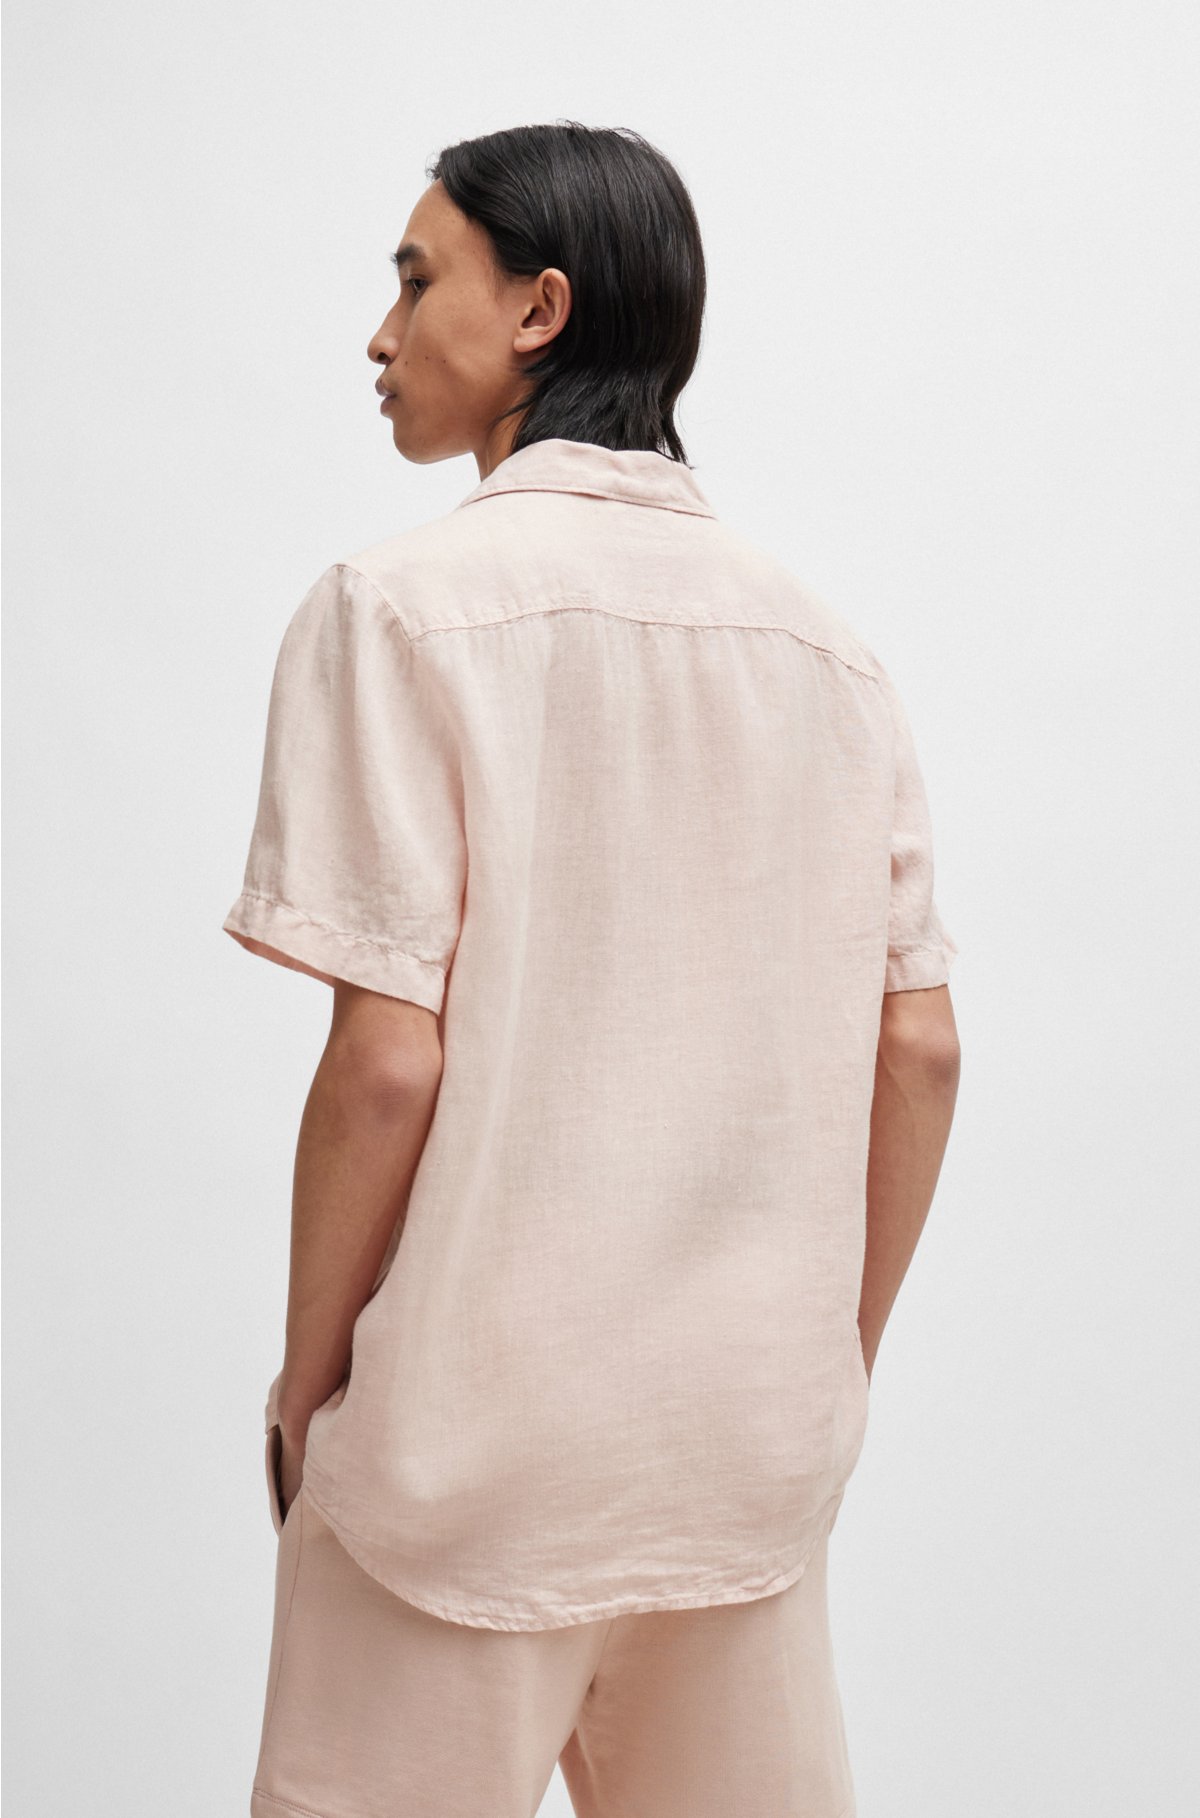 Relaxed-fit multi-occasional shirt in linen, light pink